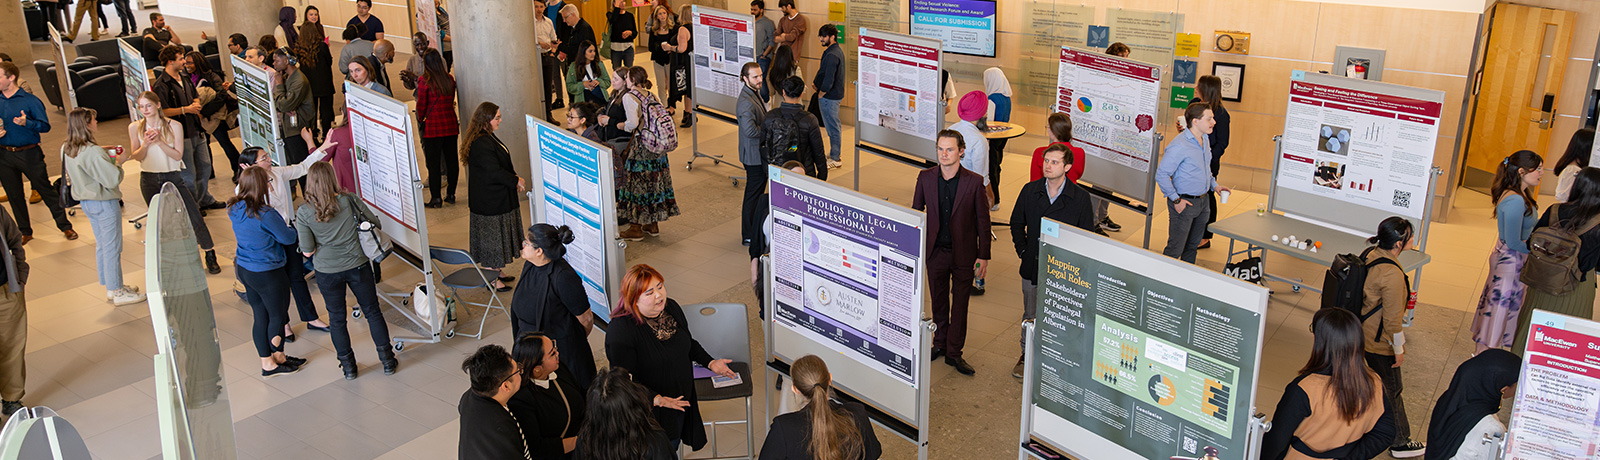 student research day displays with crowd of people